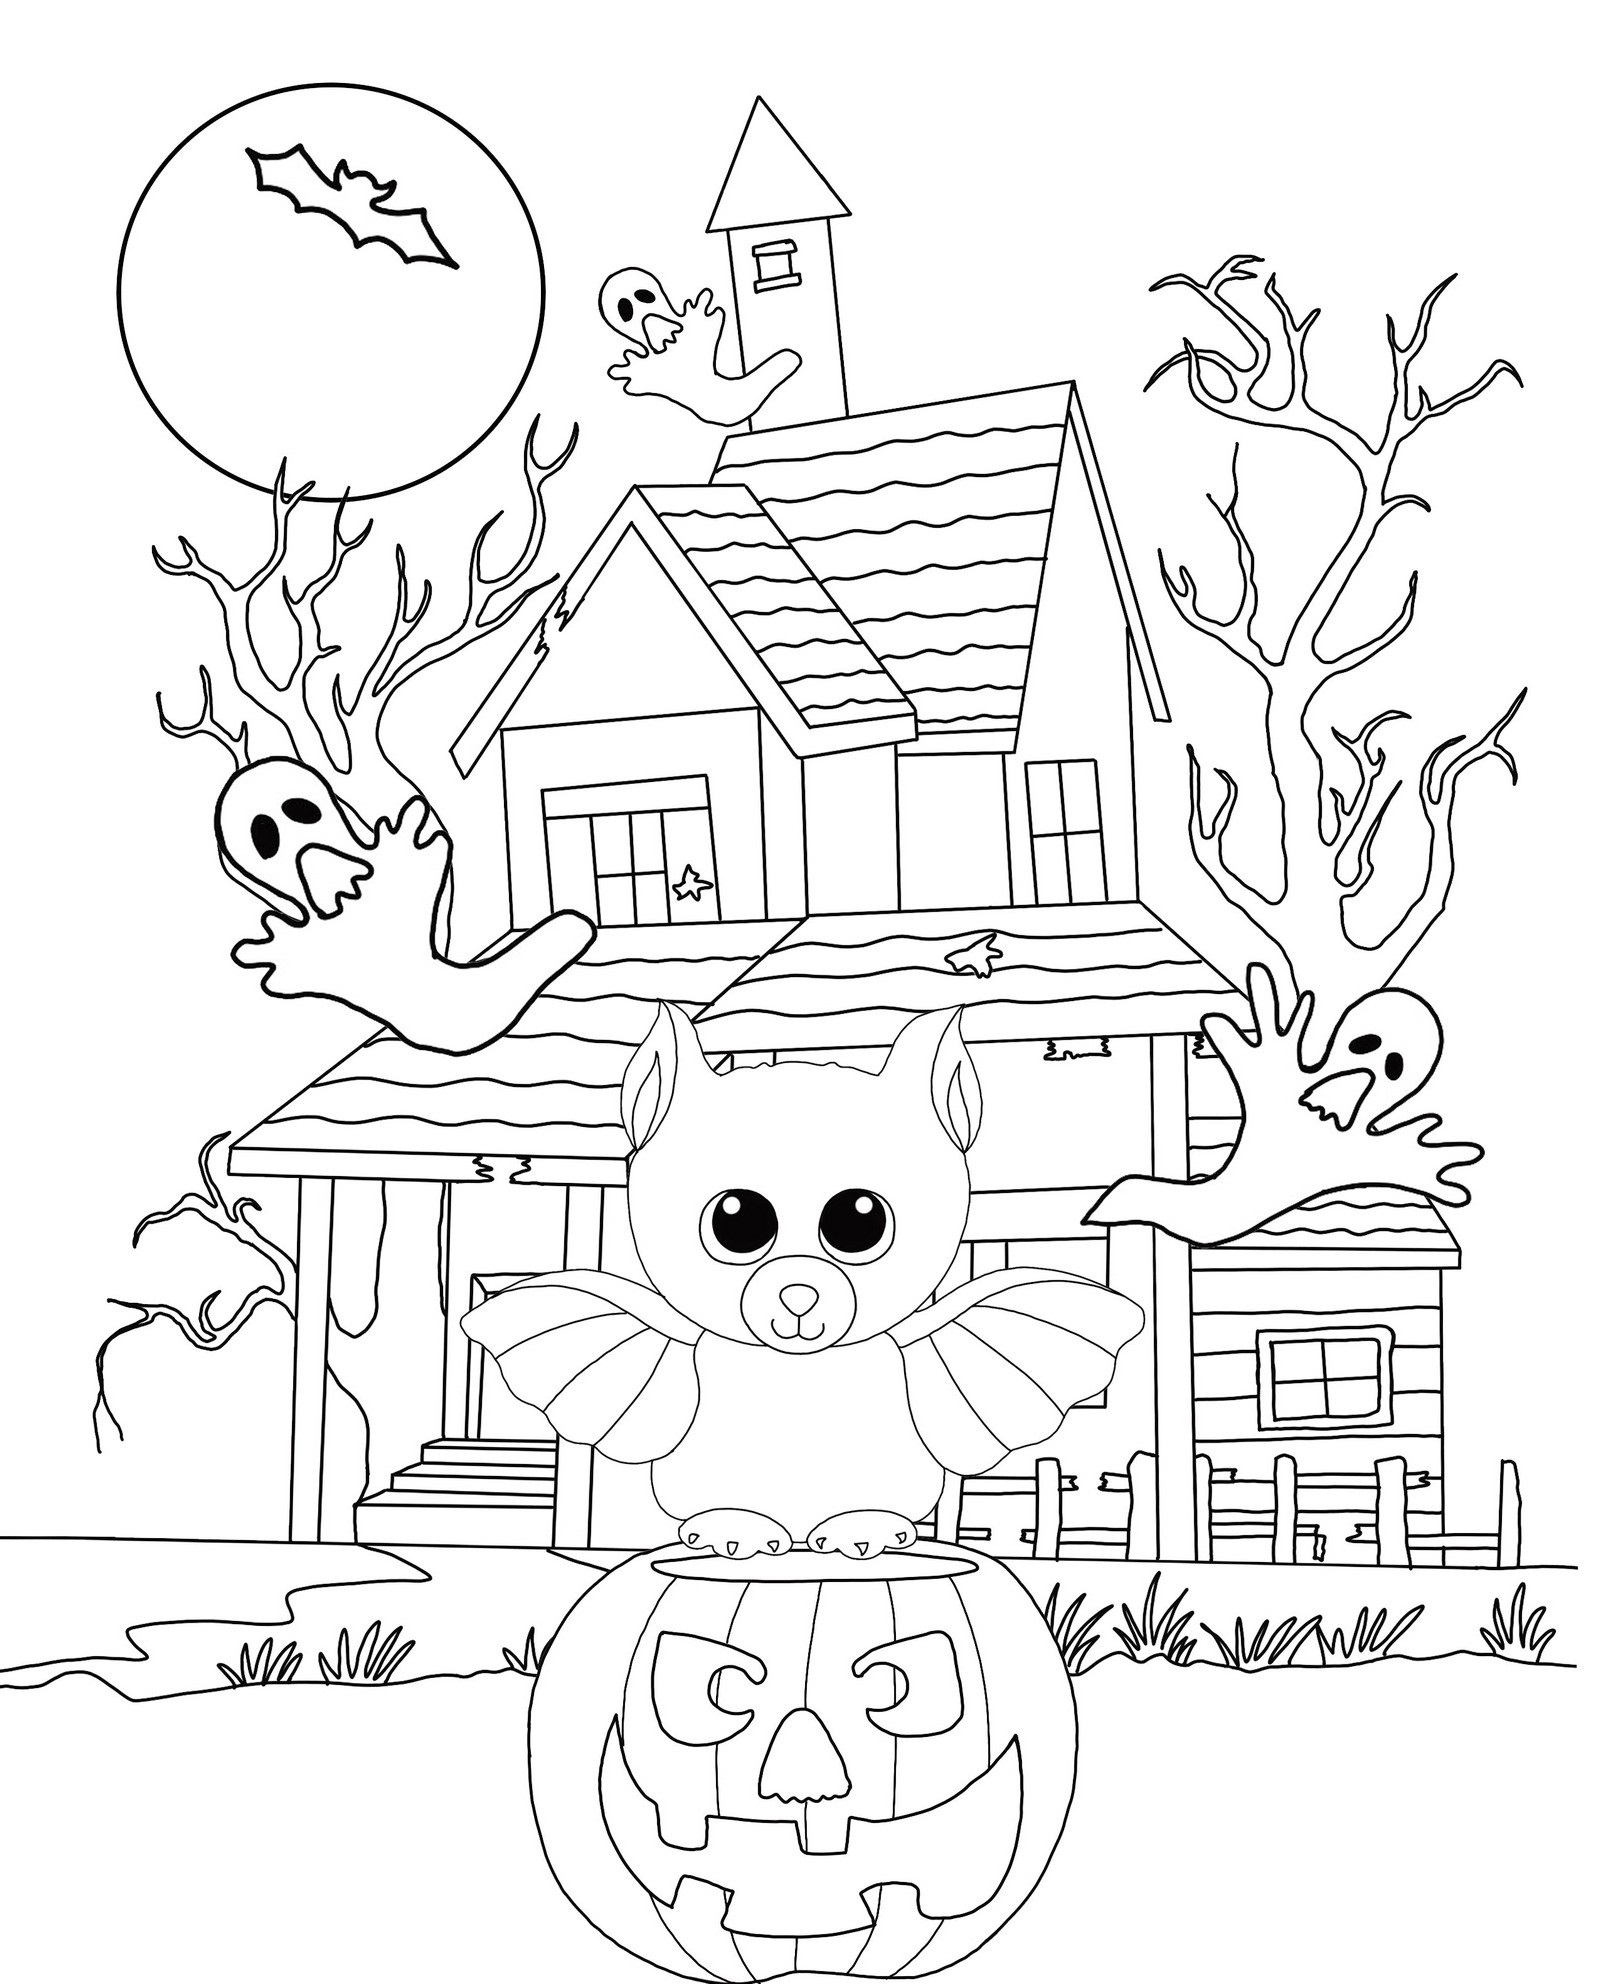 Midnight Bat Halloween beanie boo coloring pages